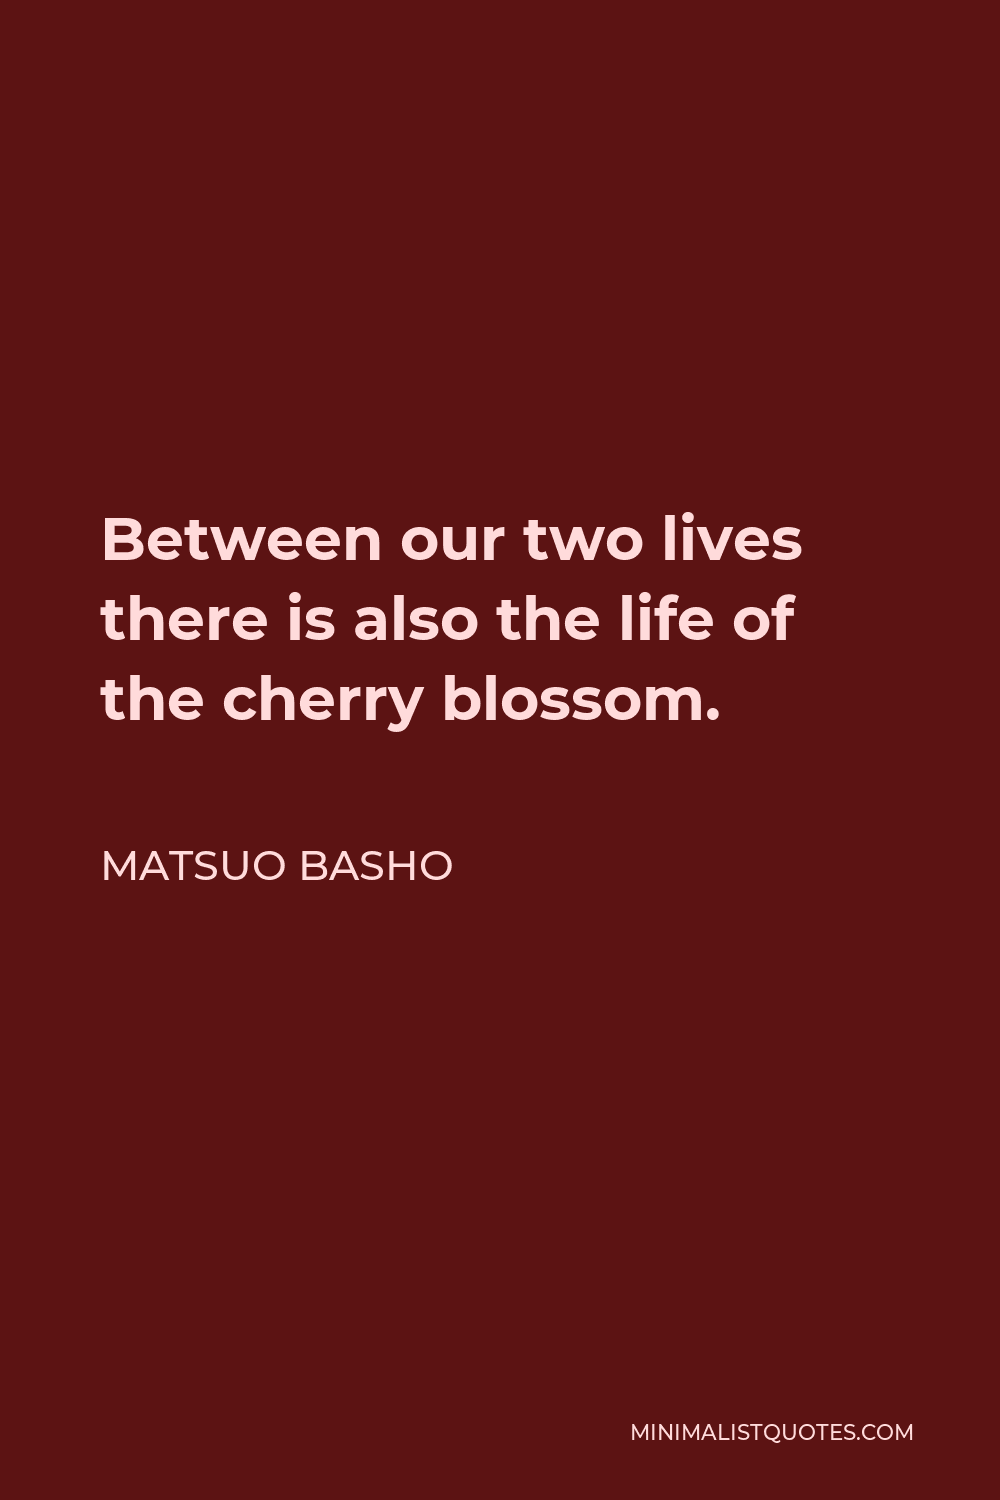 Matsuo Basho Quote - Between our two lives there is also the life of the cherry blossom.